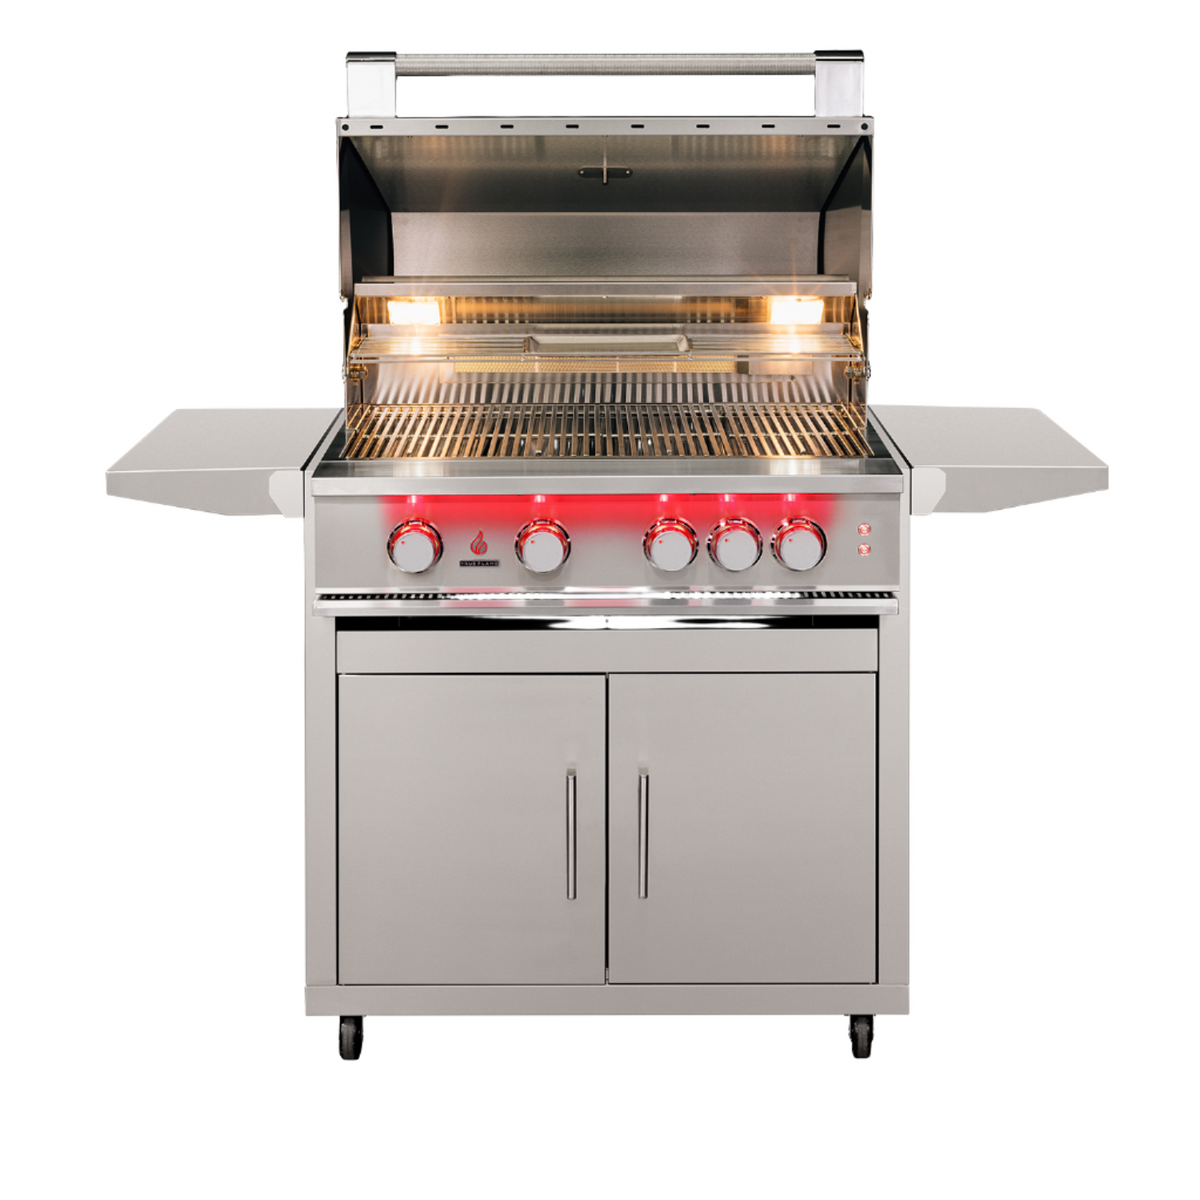 TrueFlame 32 Inch Grill - Freestanding